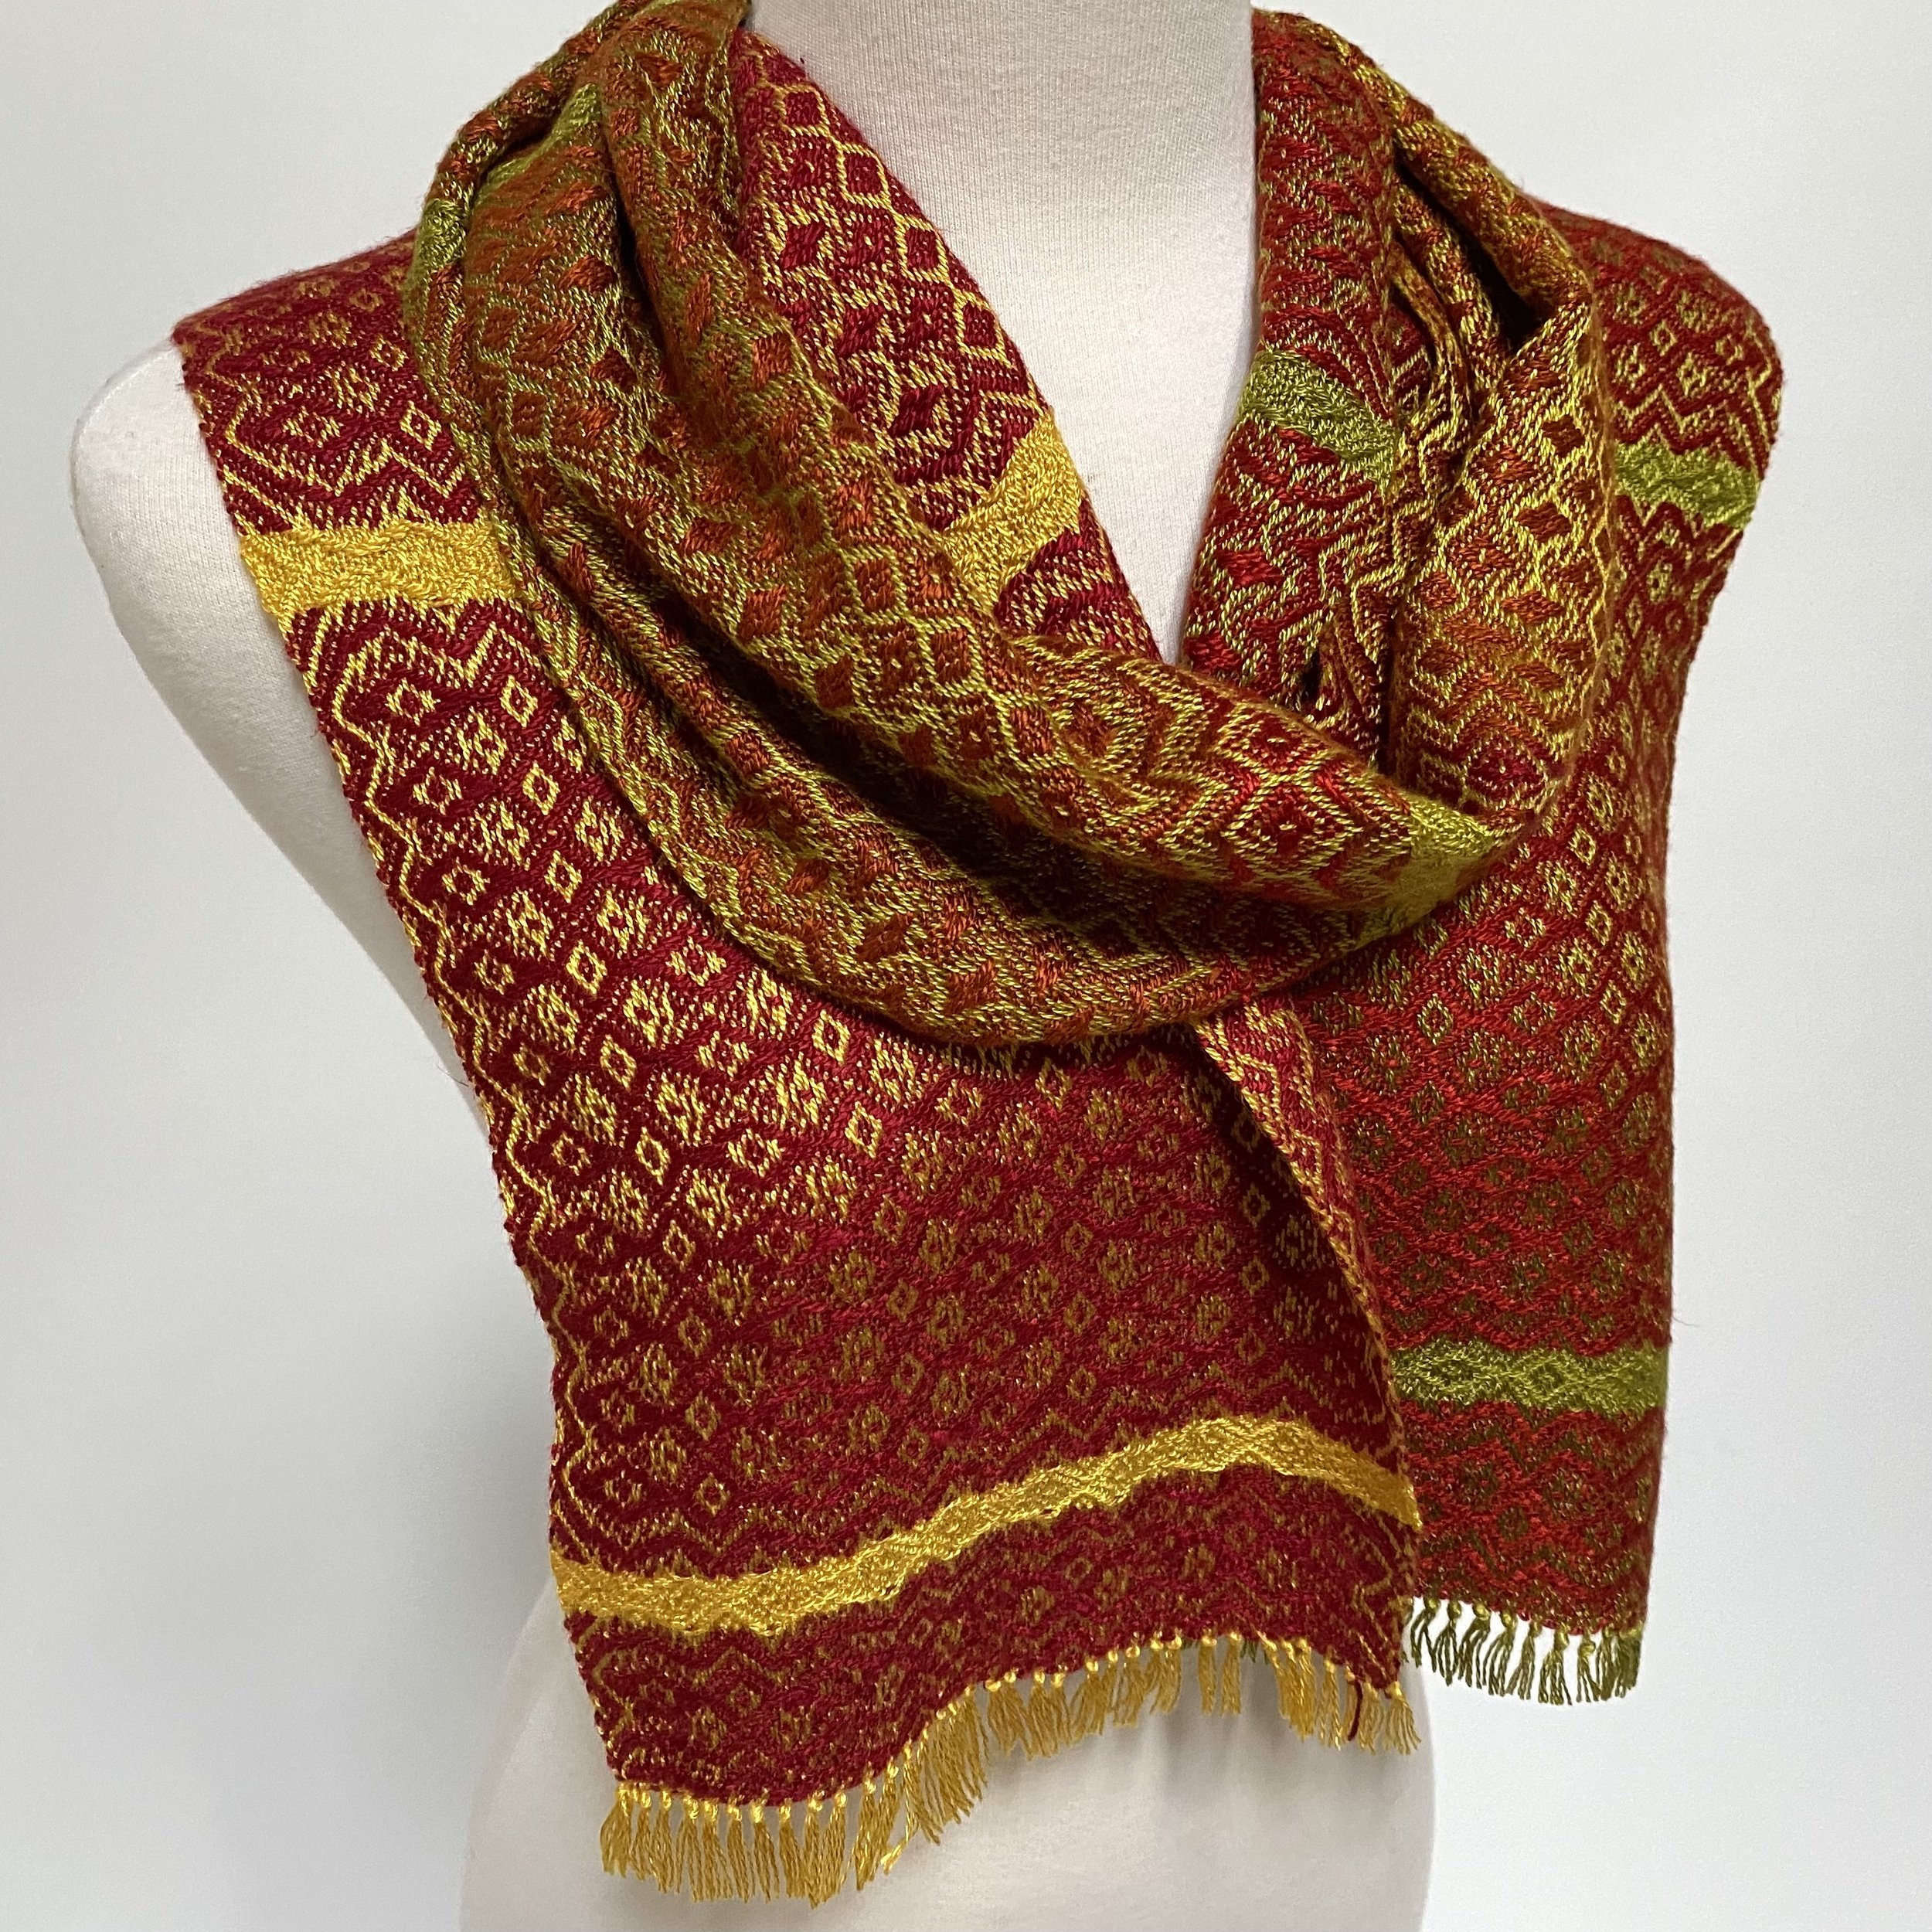   Autumn Inspiration Handwoven Scarf 5       For more details by clicking on this link. 